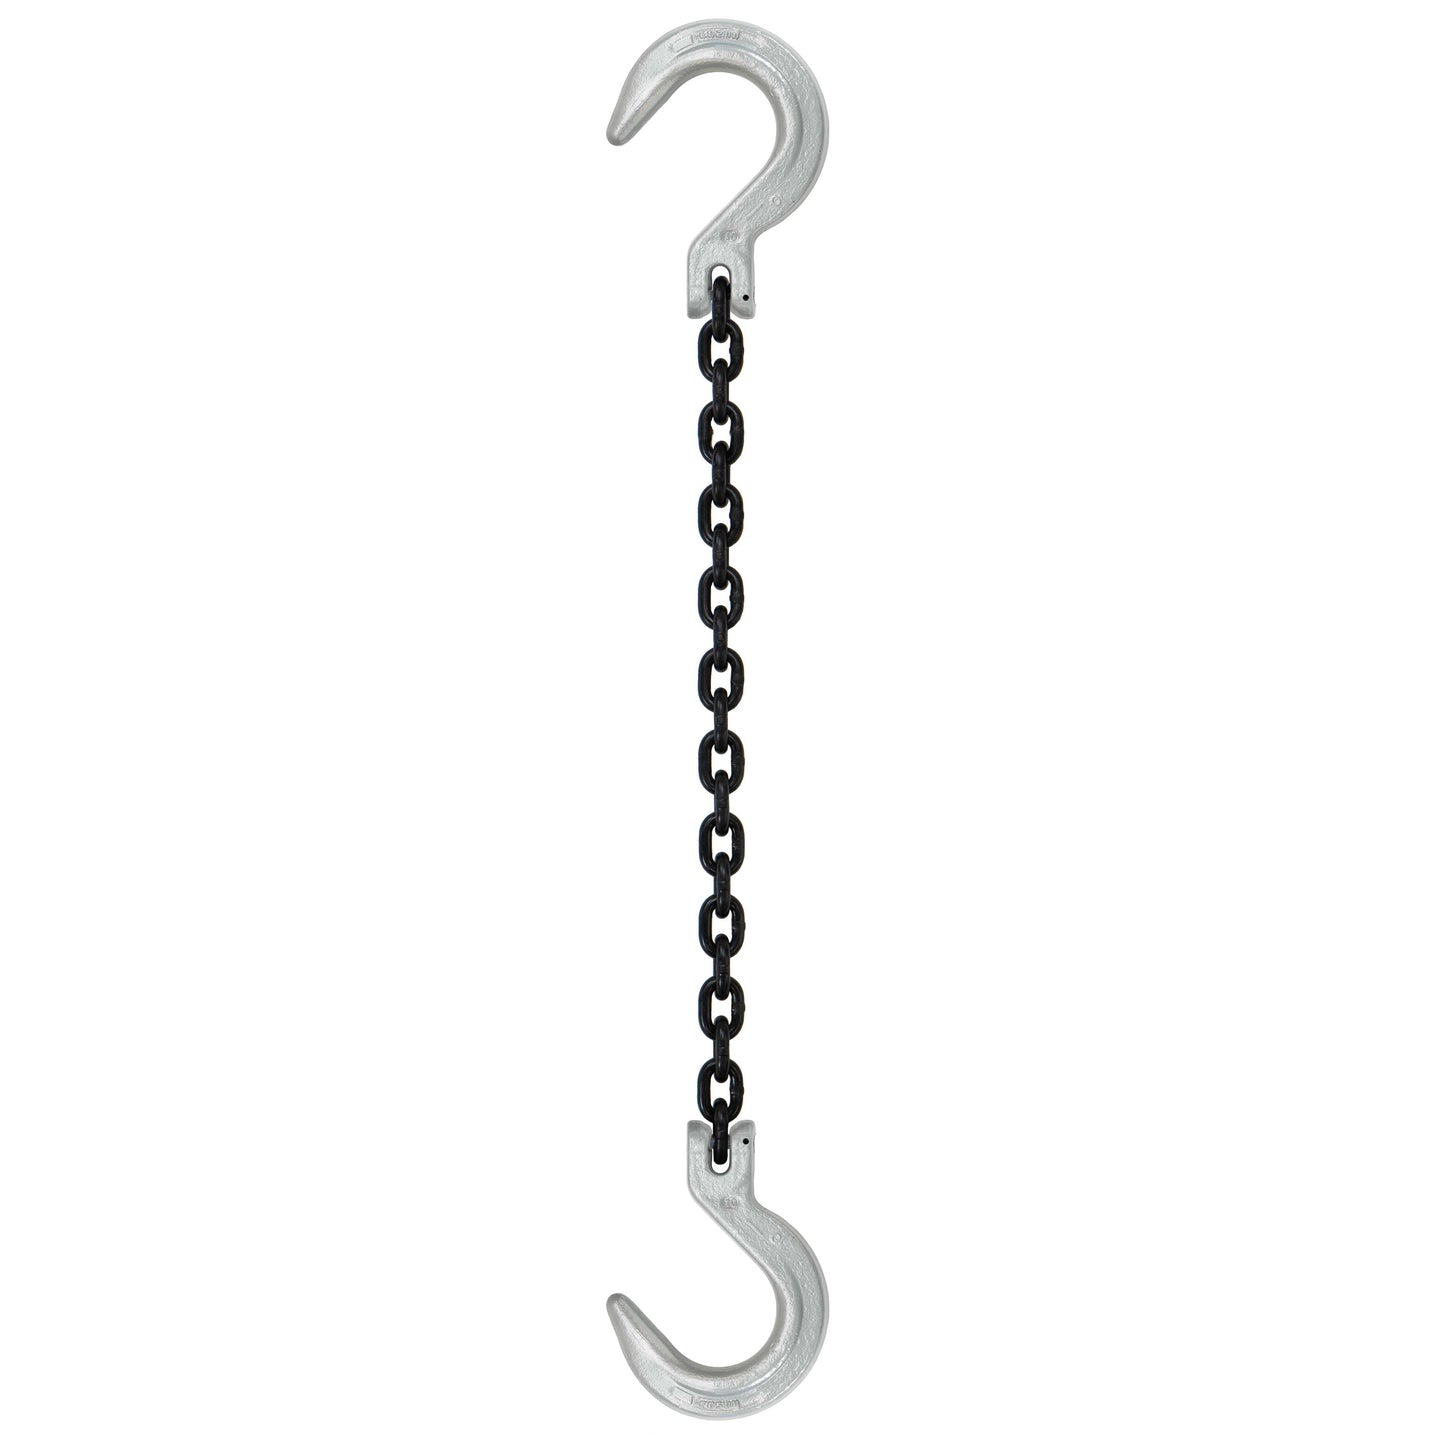 12 inch x 6 foot Domestic Single Leg Chain Sling w Crosby Foundry & Foundry Hooks Grade 100 image 1 of 2